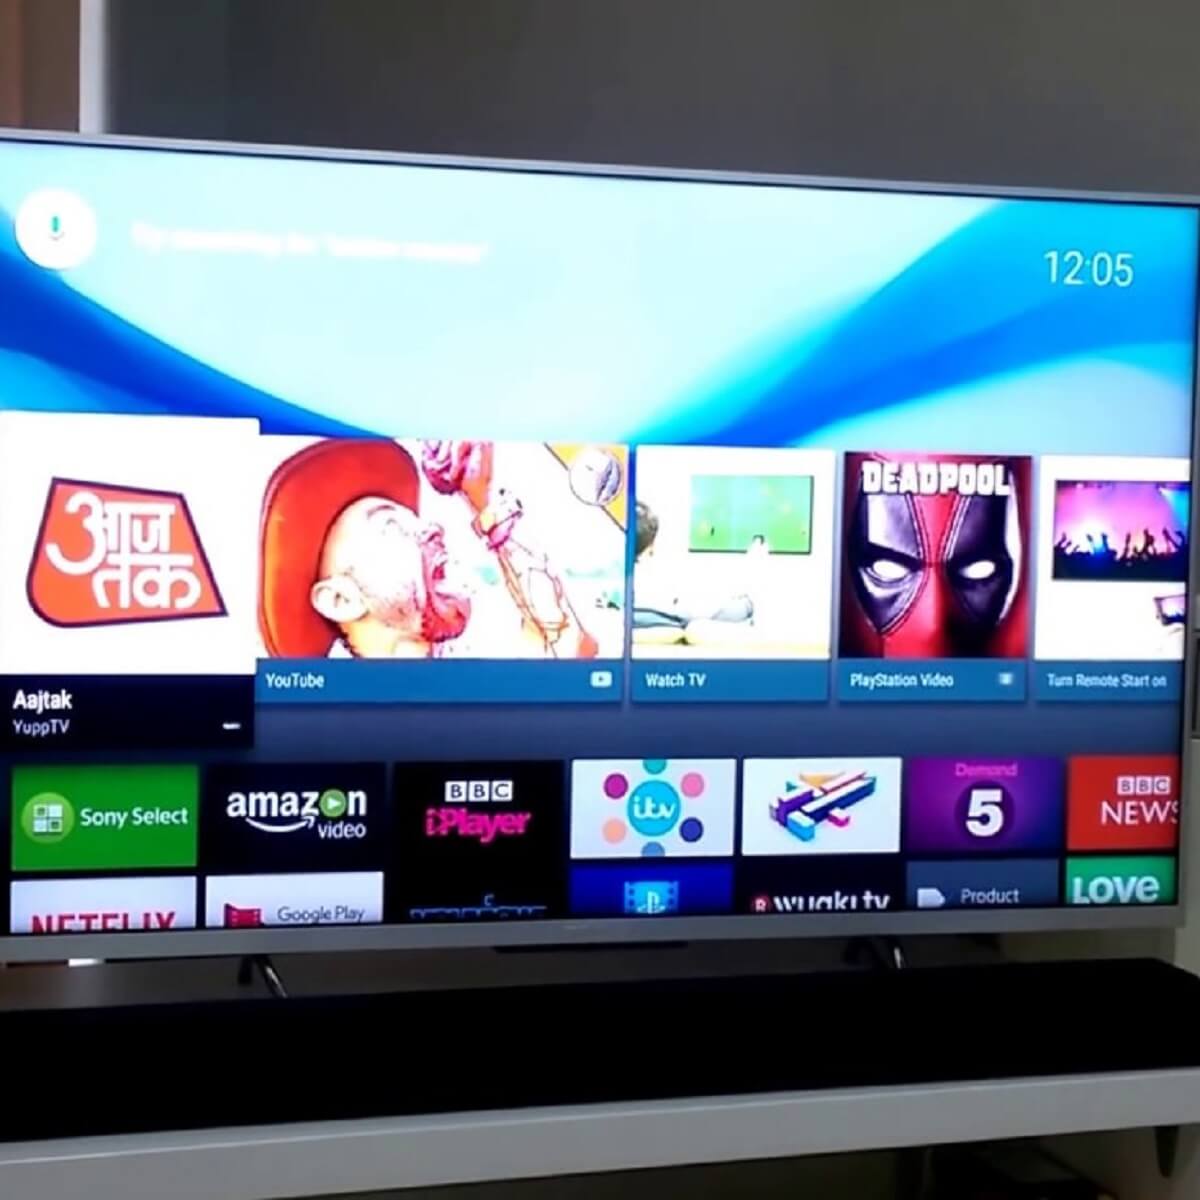 sony smart tv apps not being displayed